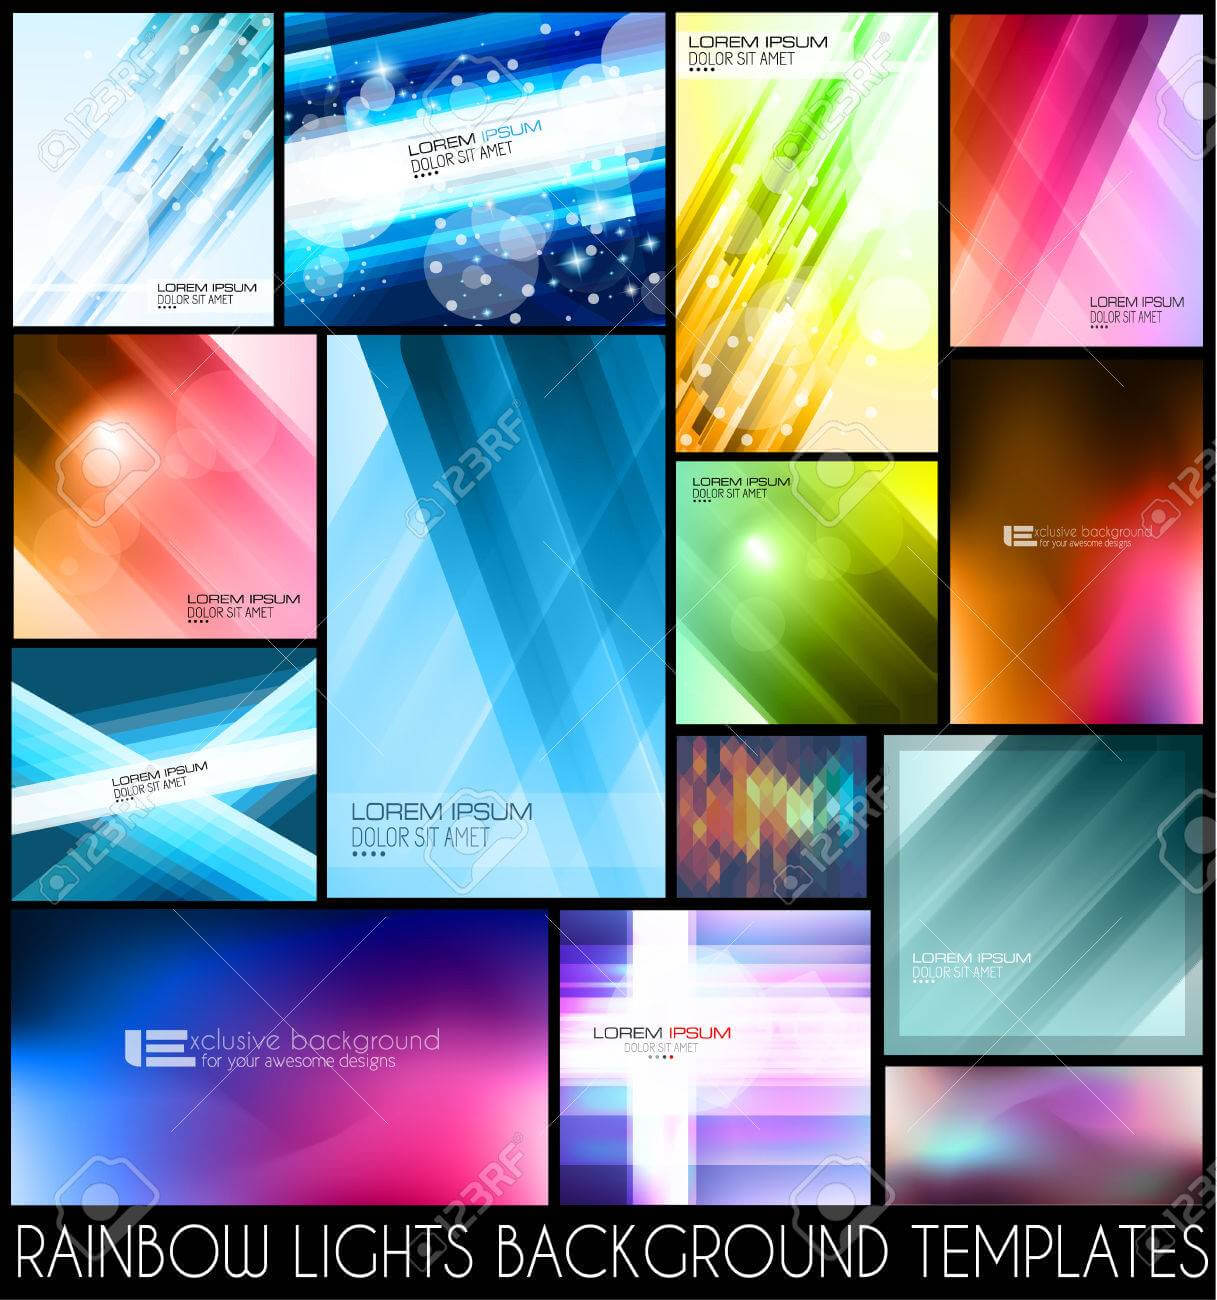 Abstract Background Templates For Your Colorful Flyers Or Business.. Intended For Background Templates For Flyers